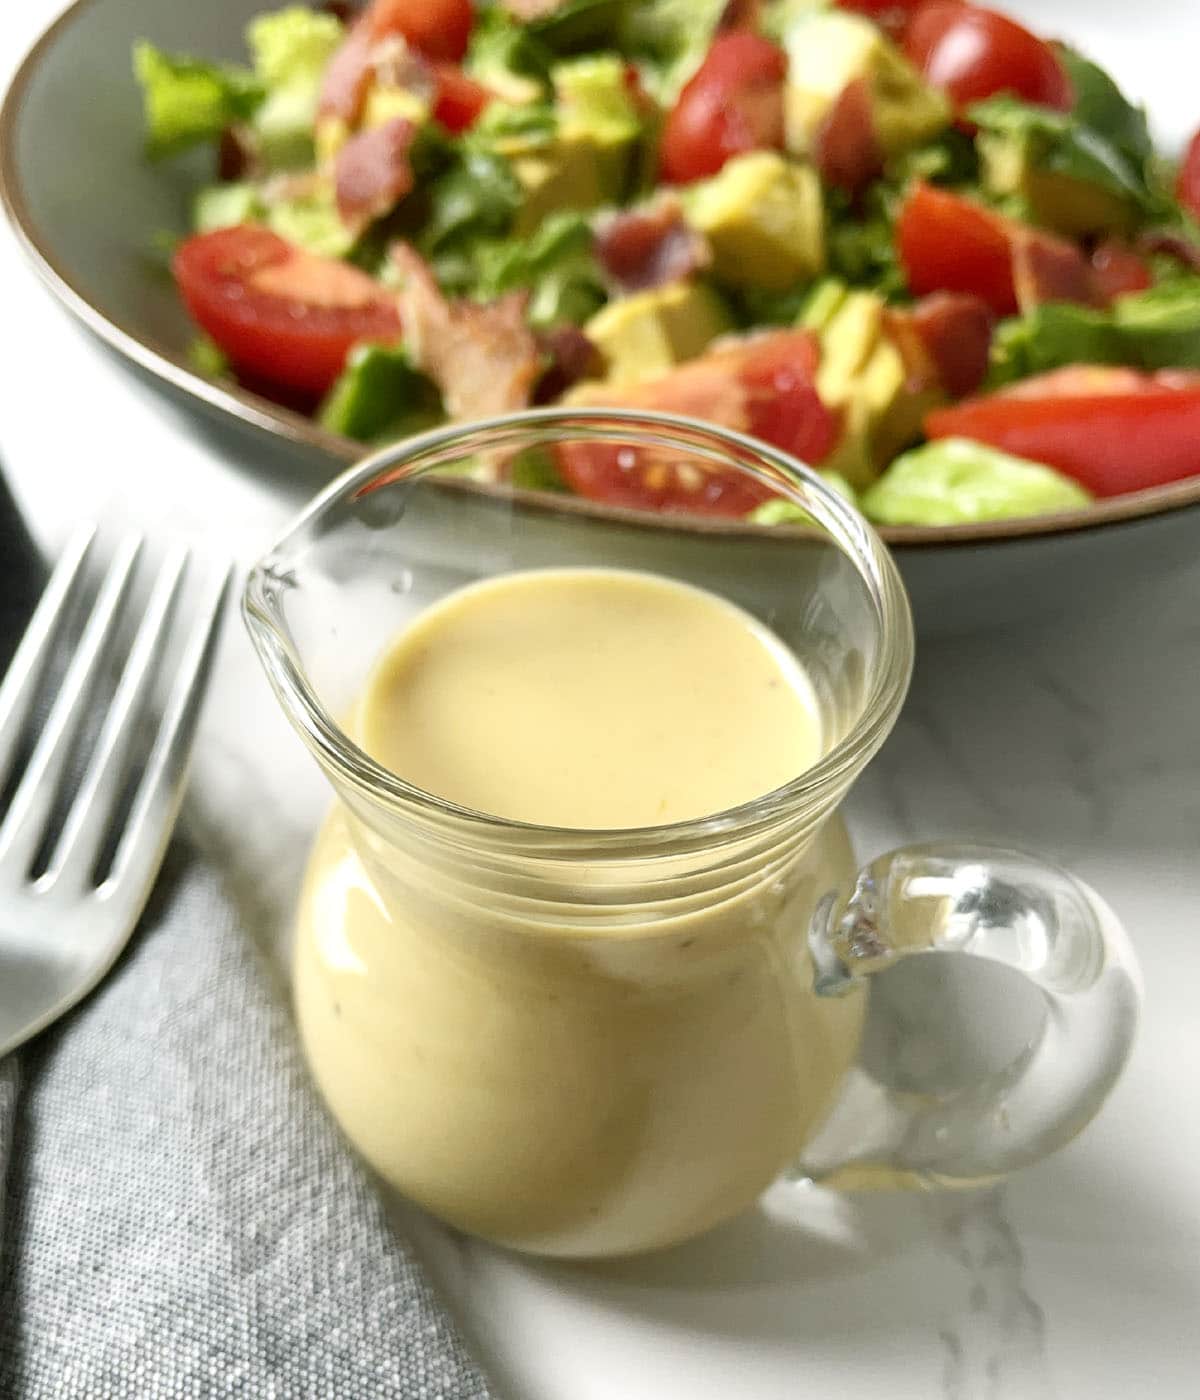 A glass pitcher containing yellow honey mustard dressing, next to a fork and a plate containing a salad.